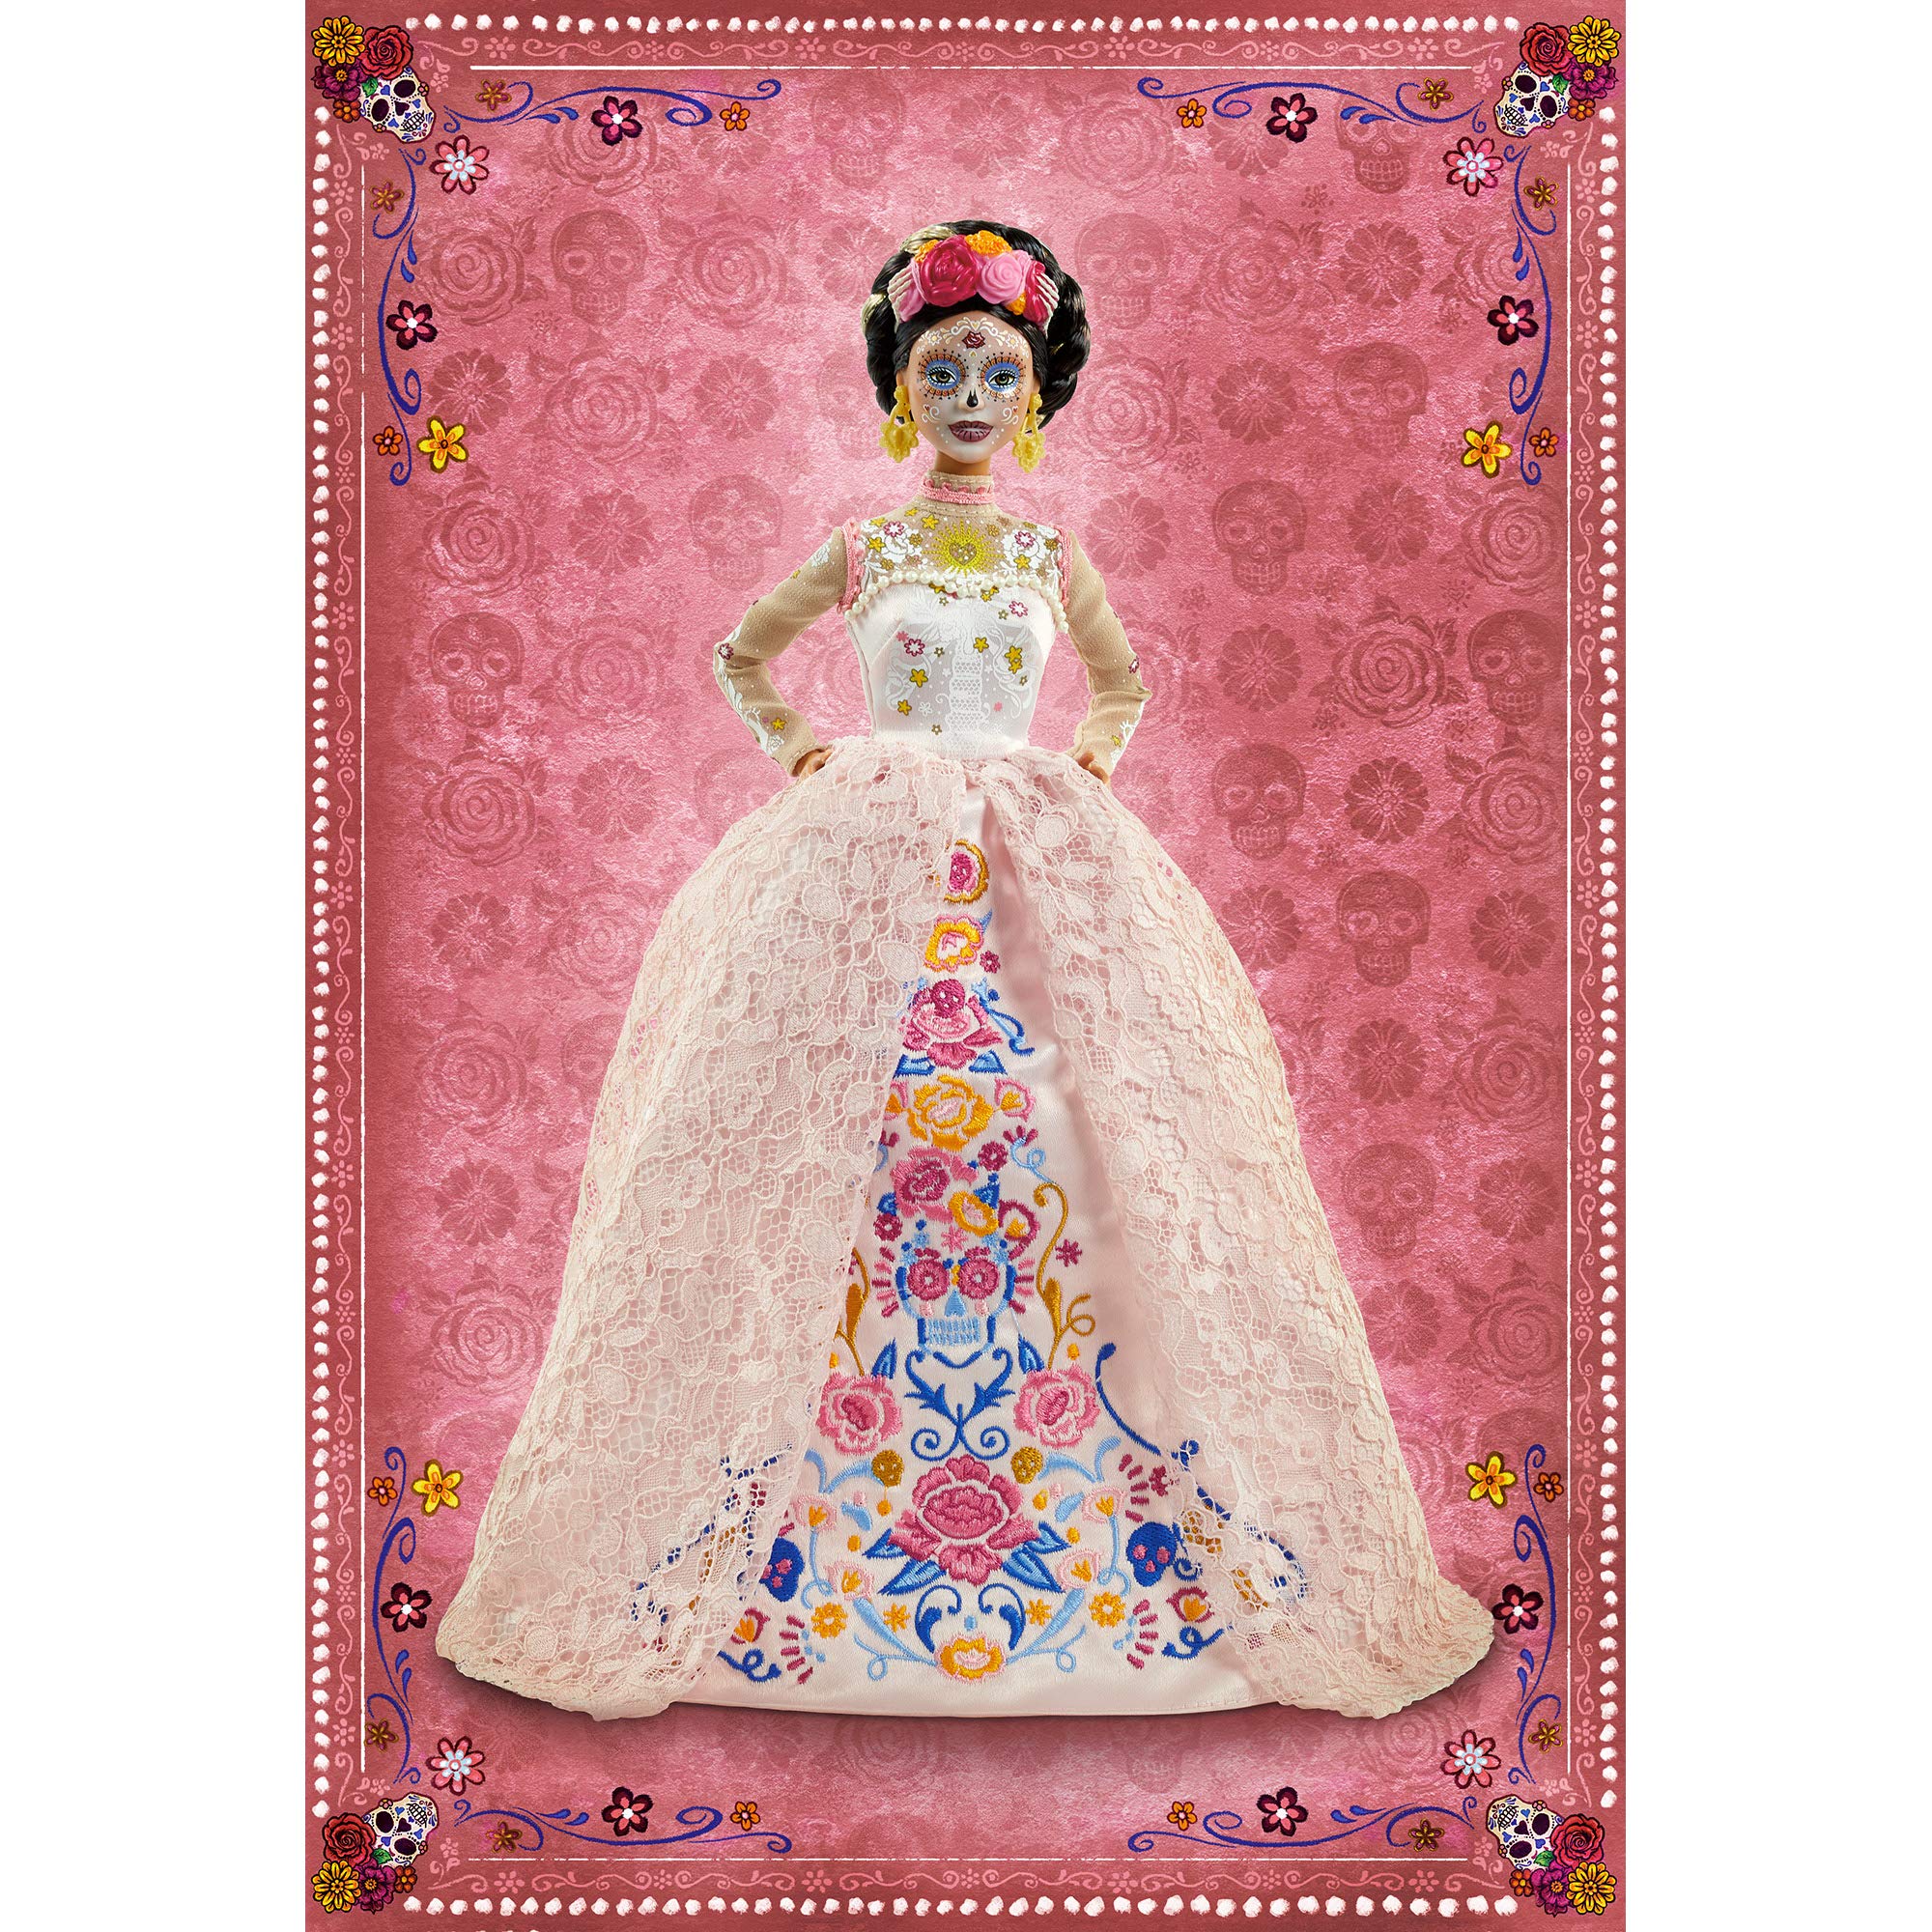 Barbie Signature Dia De Muertos 2020 Doll (12-in Brunette) in Embroidered Lace Dress and Flower Crown, with Certificate of Authenticity